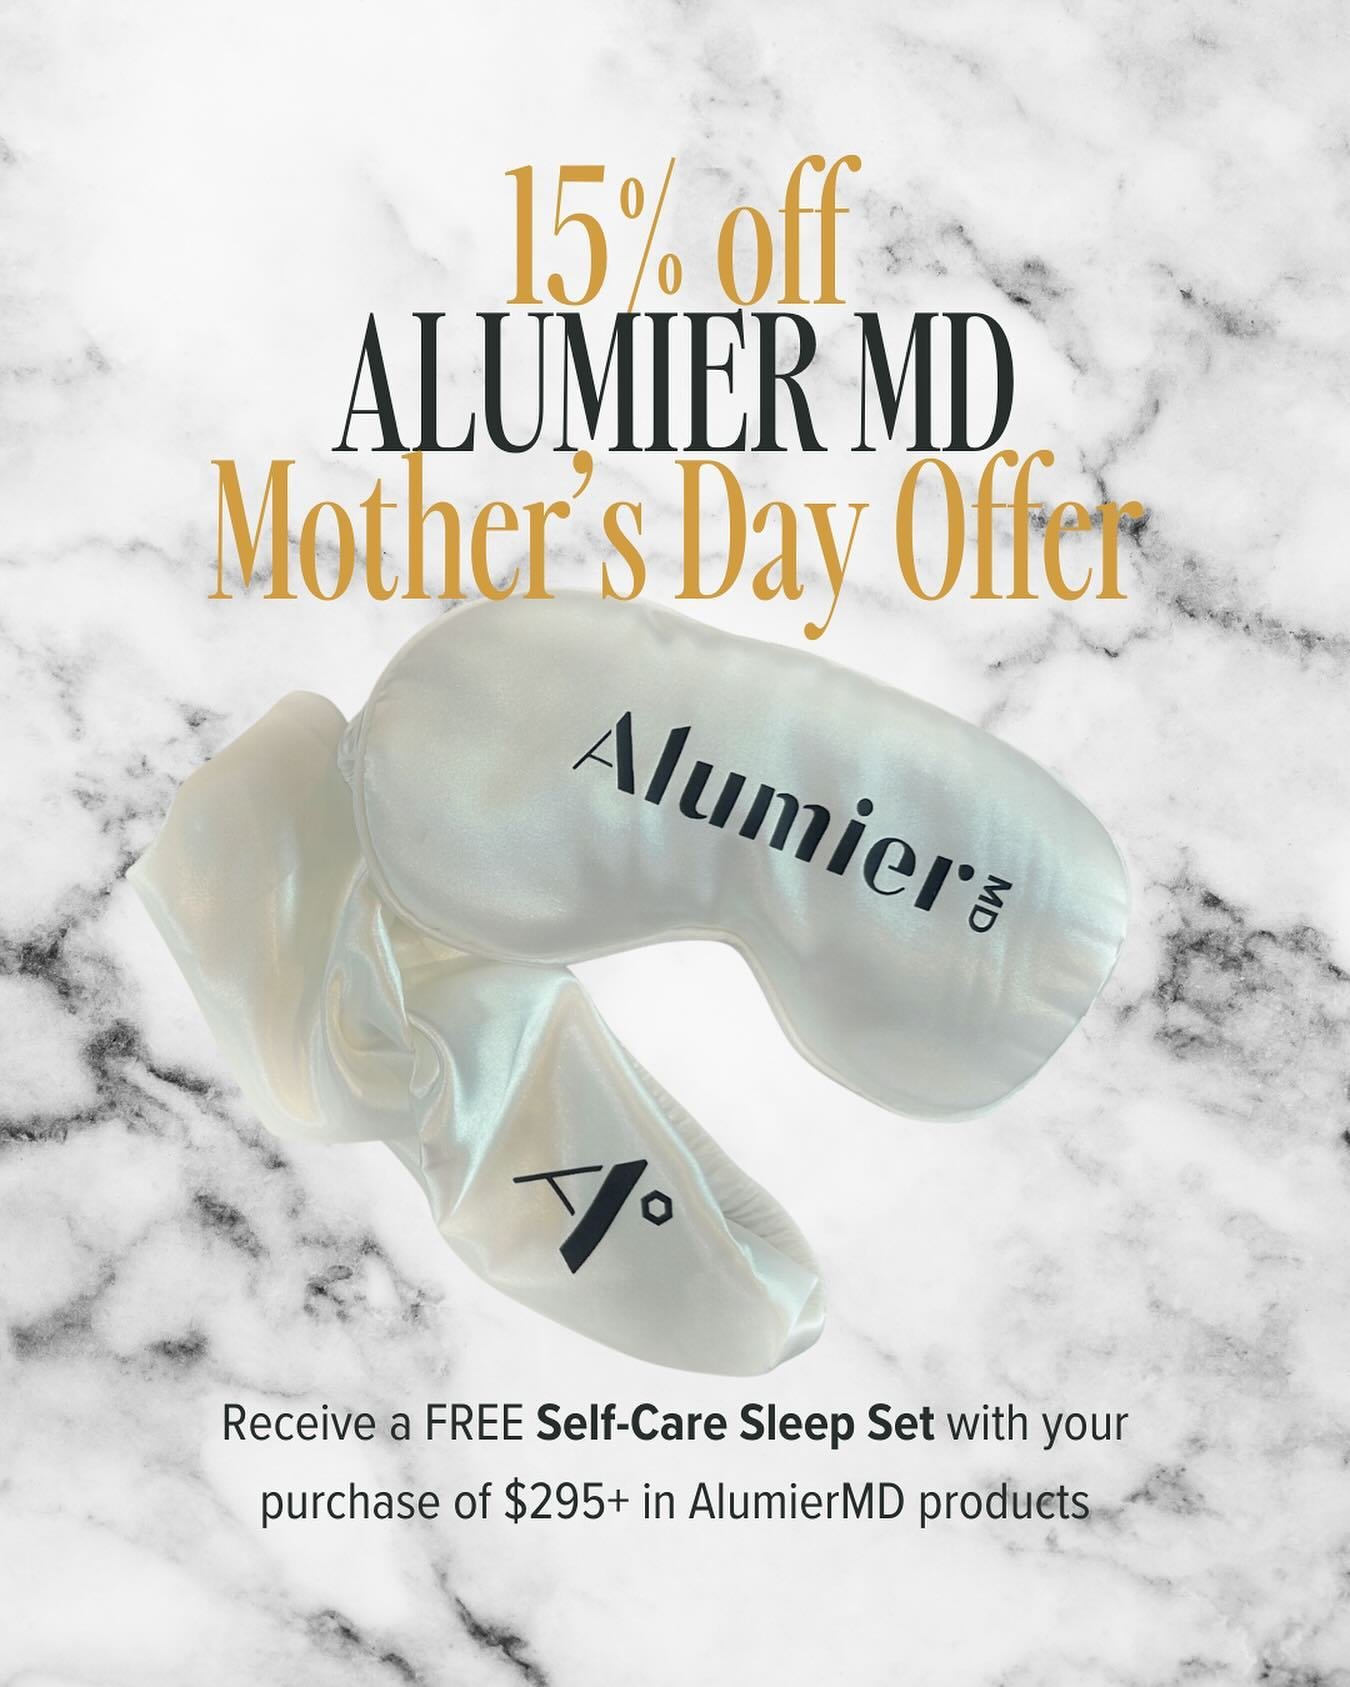 This Mother&rsquo;s Day, give her the gift of self care! AlumierMD is offering 15% off their online products AND gifting a free self-care sleep set when you purchase $295+ of their products.

To redeem your offer:
🌷Make sure you have an active onlin